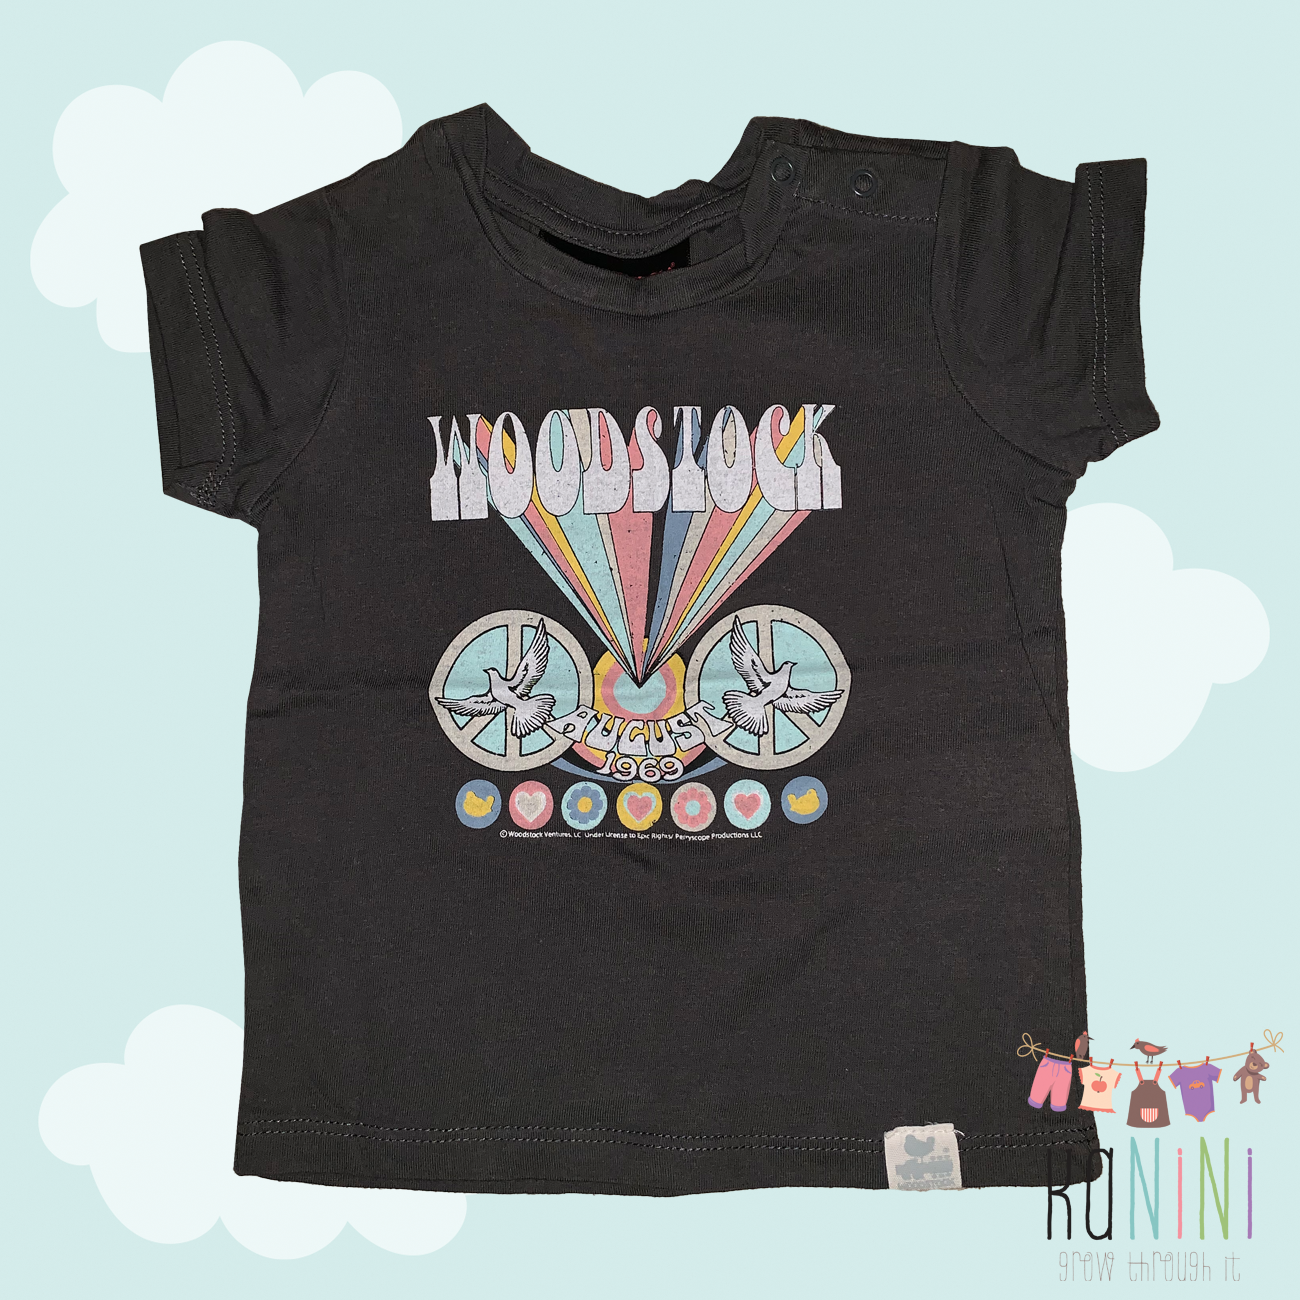 Featured image for “CottonOn 3 - 6 Months Boys Woodstock T-Shirt”